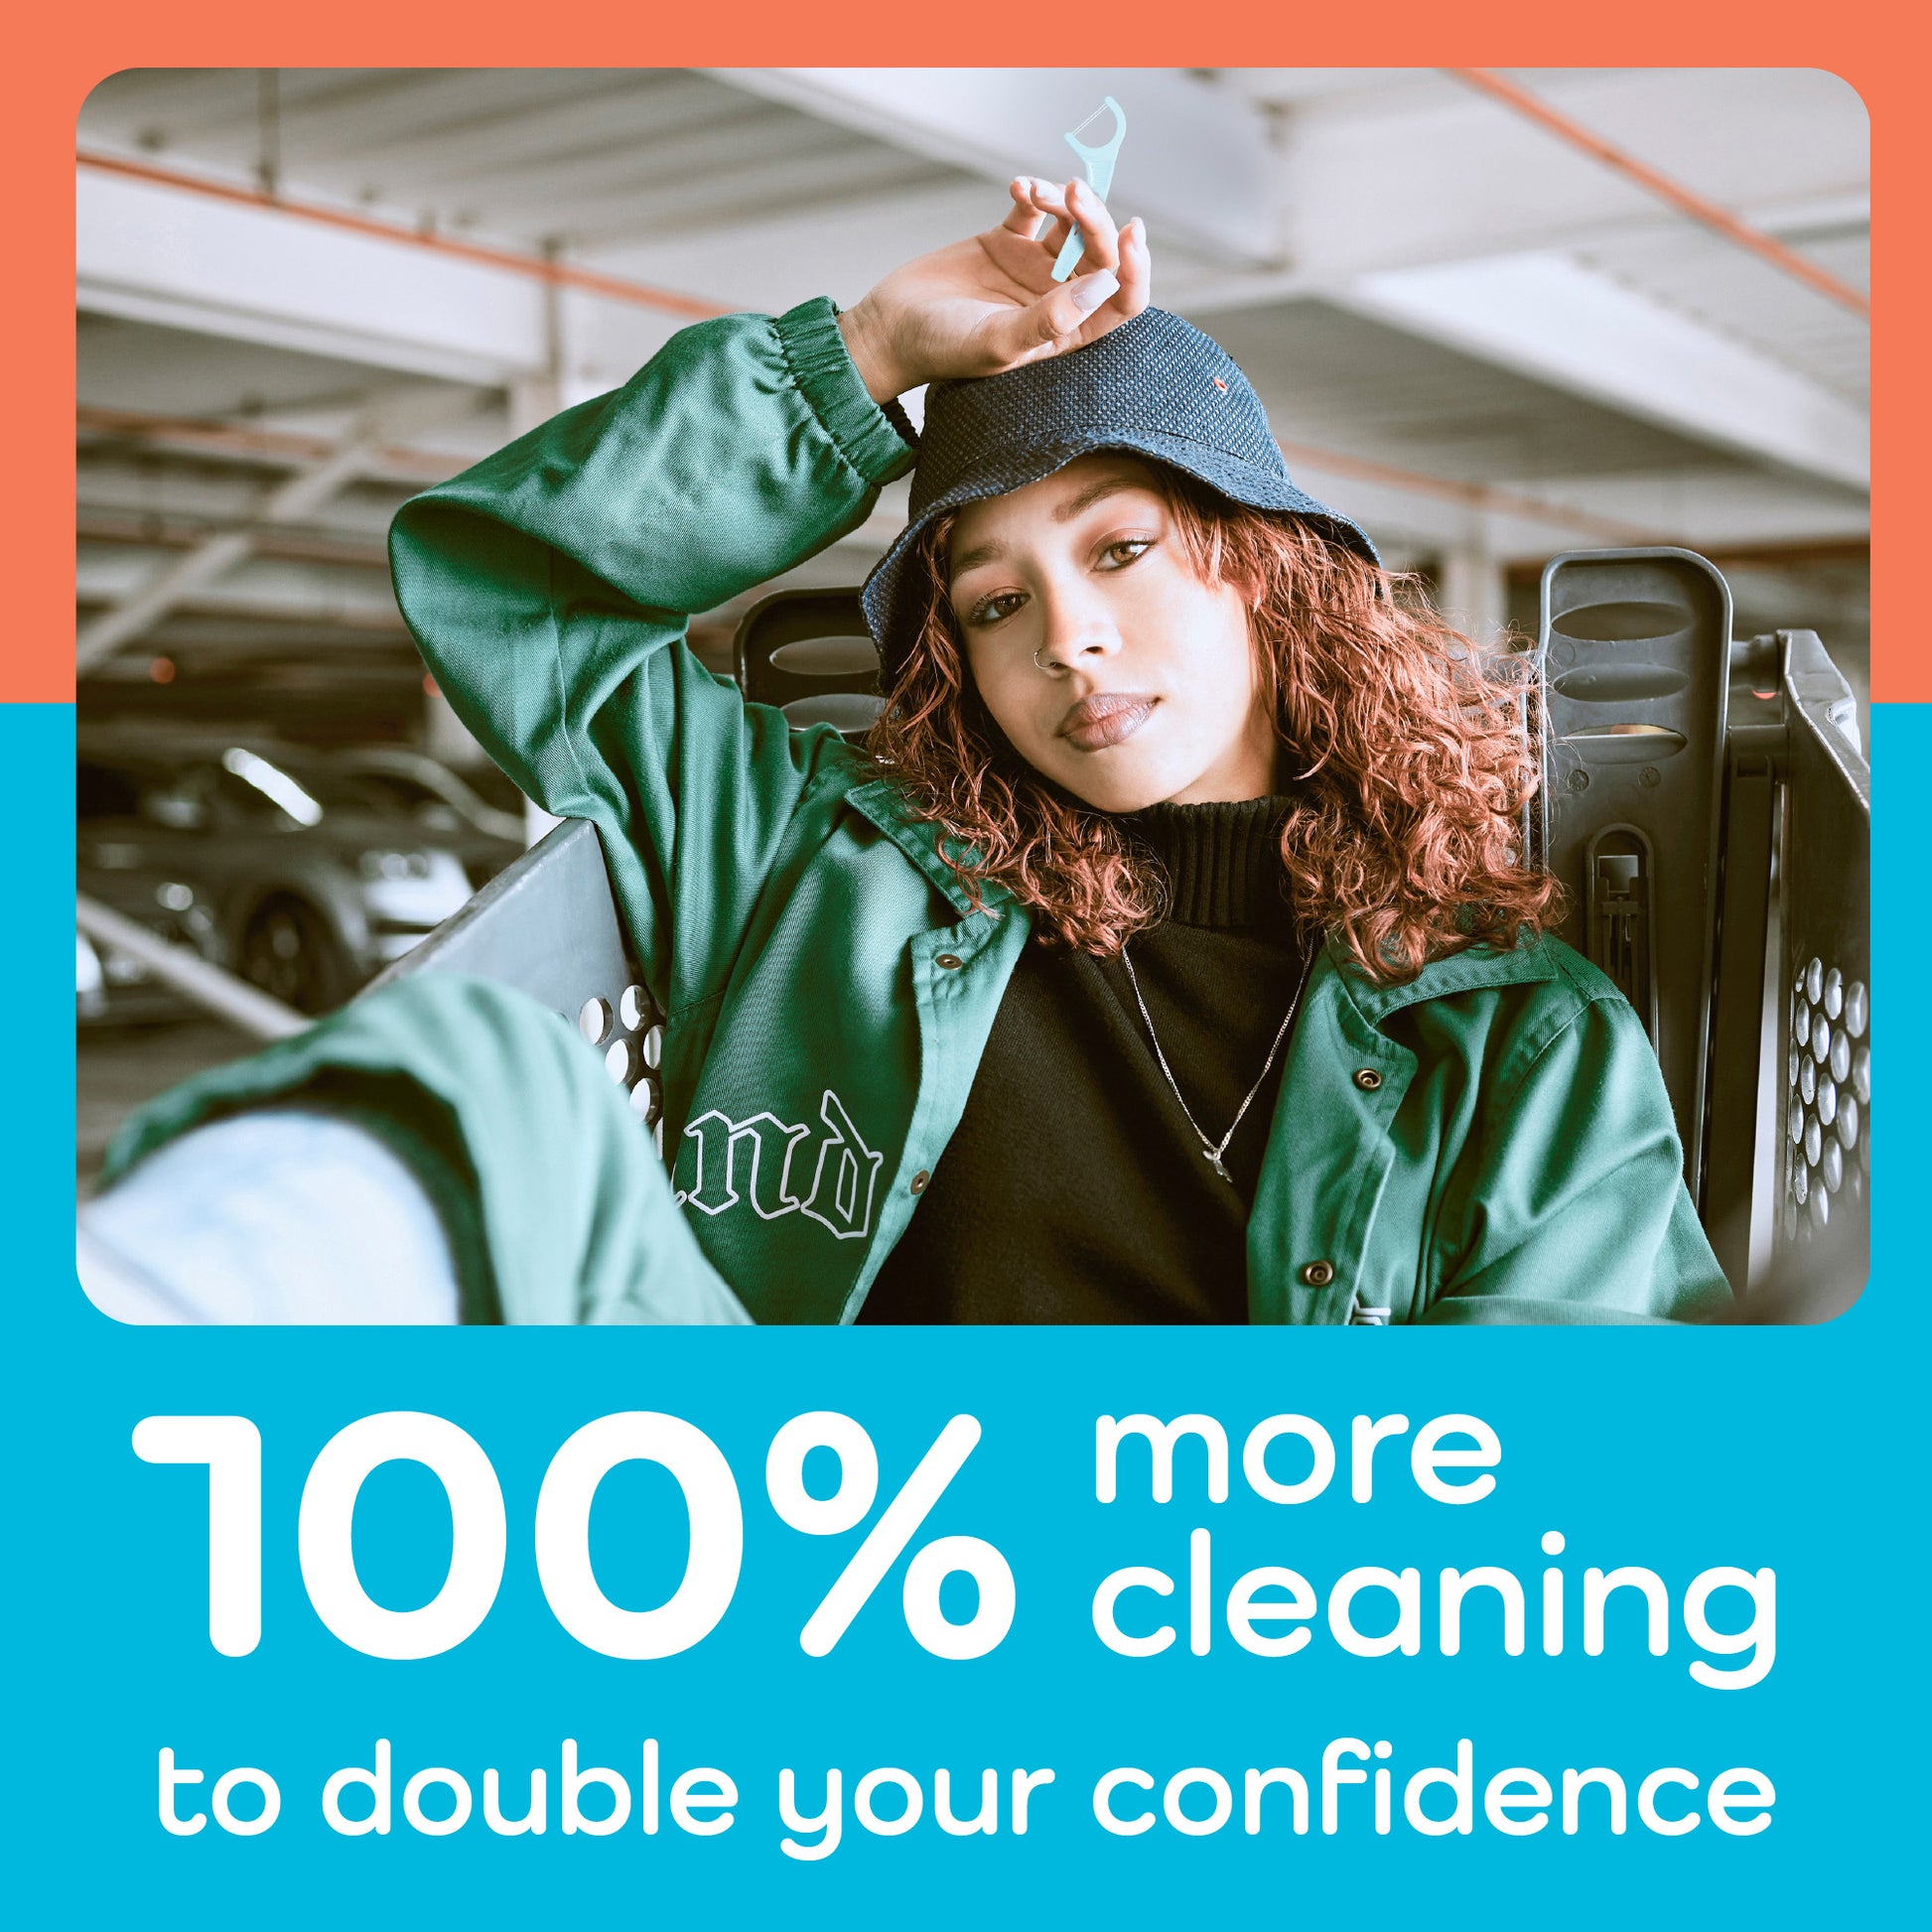  100% more cleaning to double your confidence